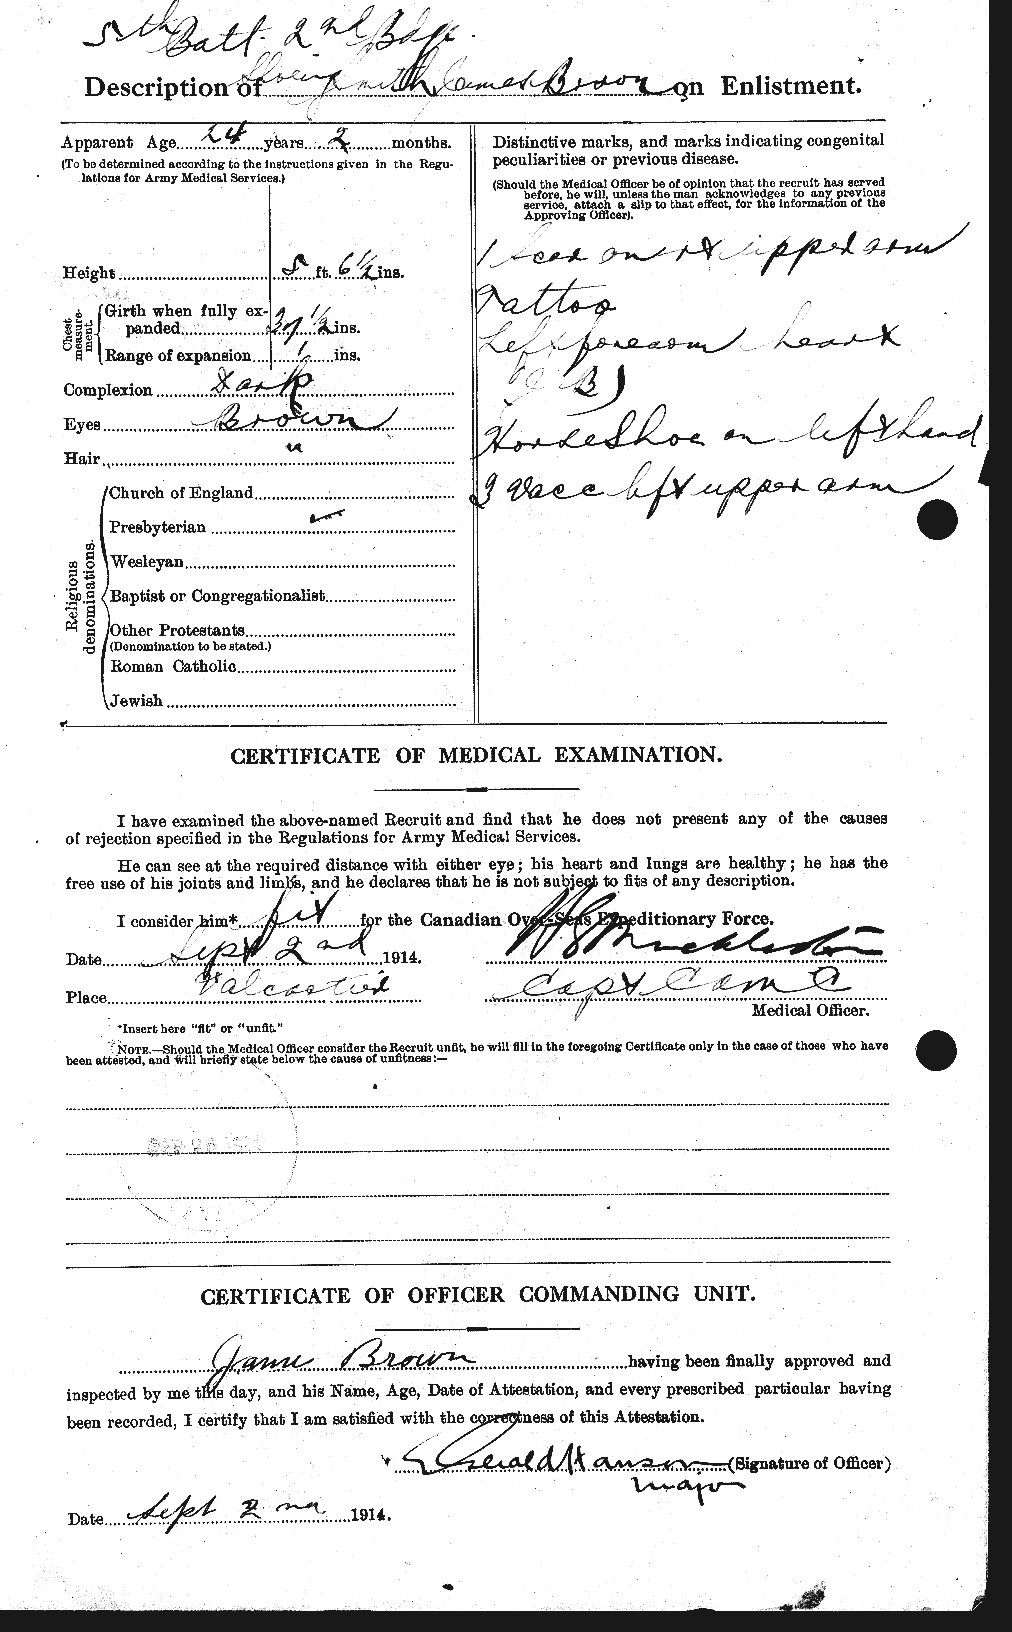 Personnel Records of the First World War - CEF 265727b